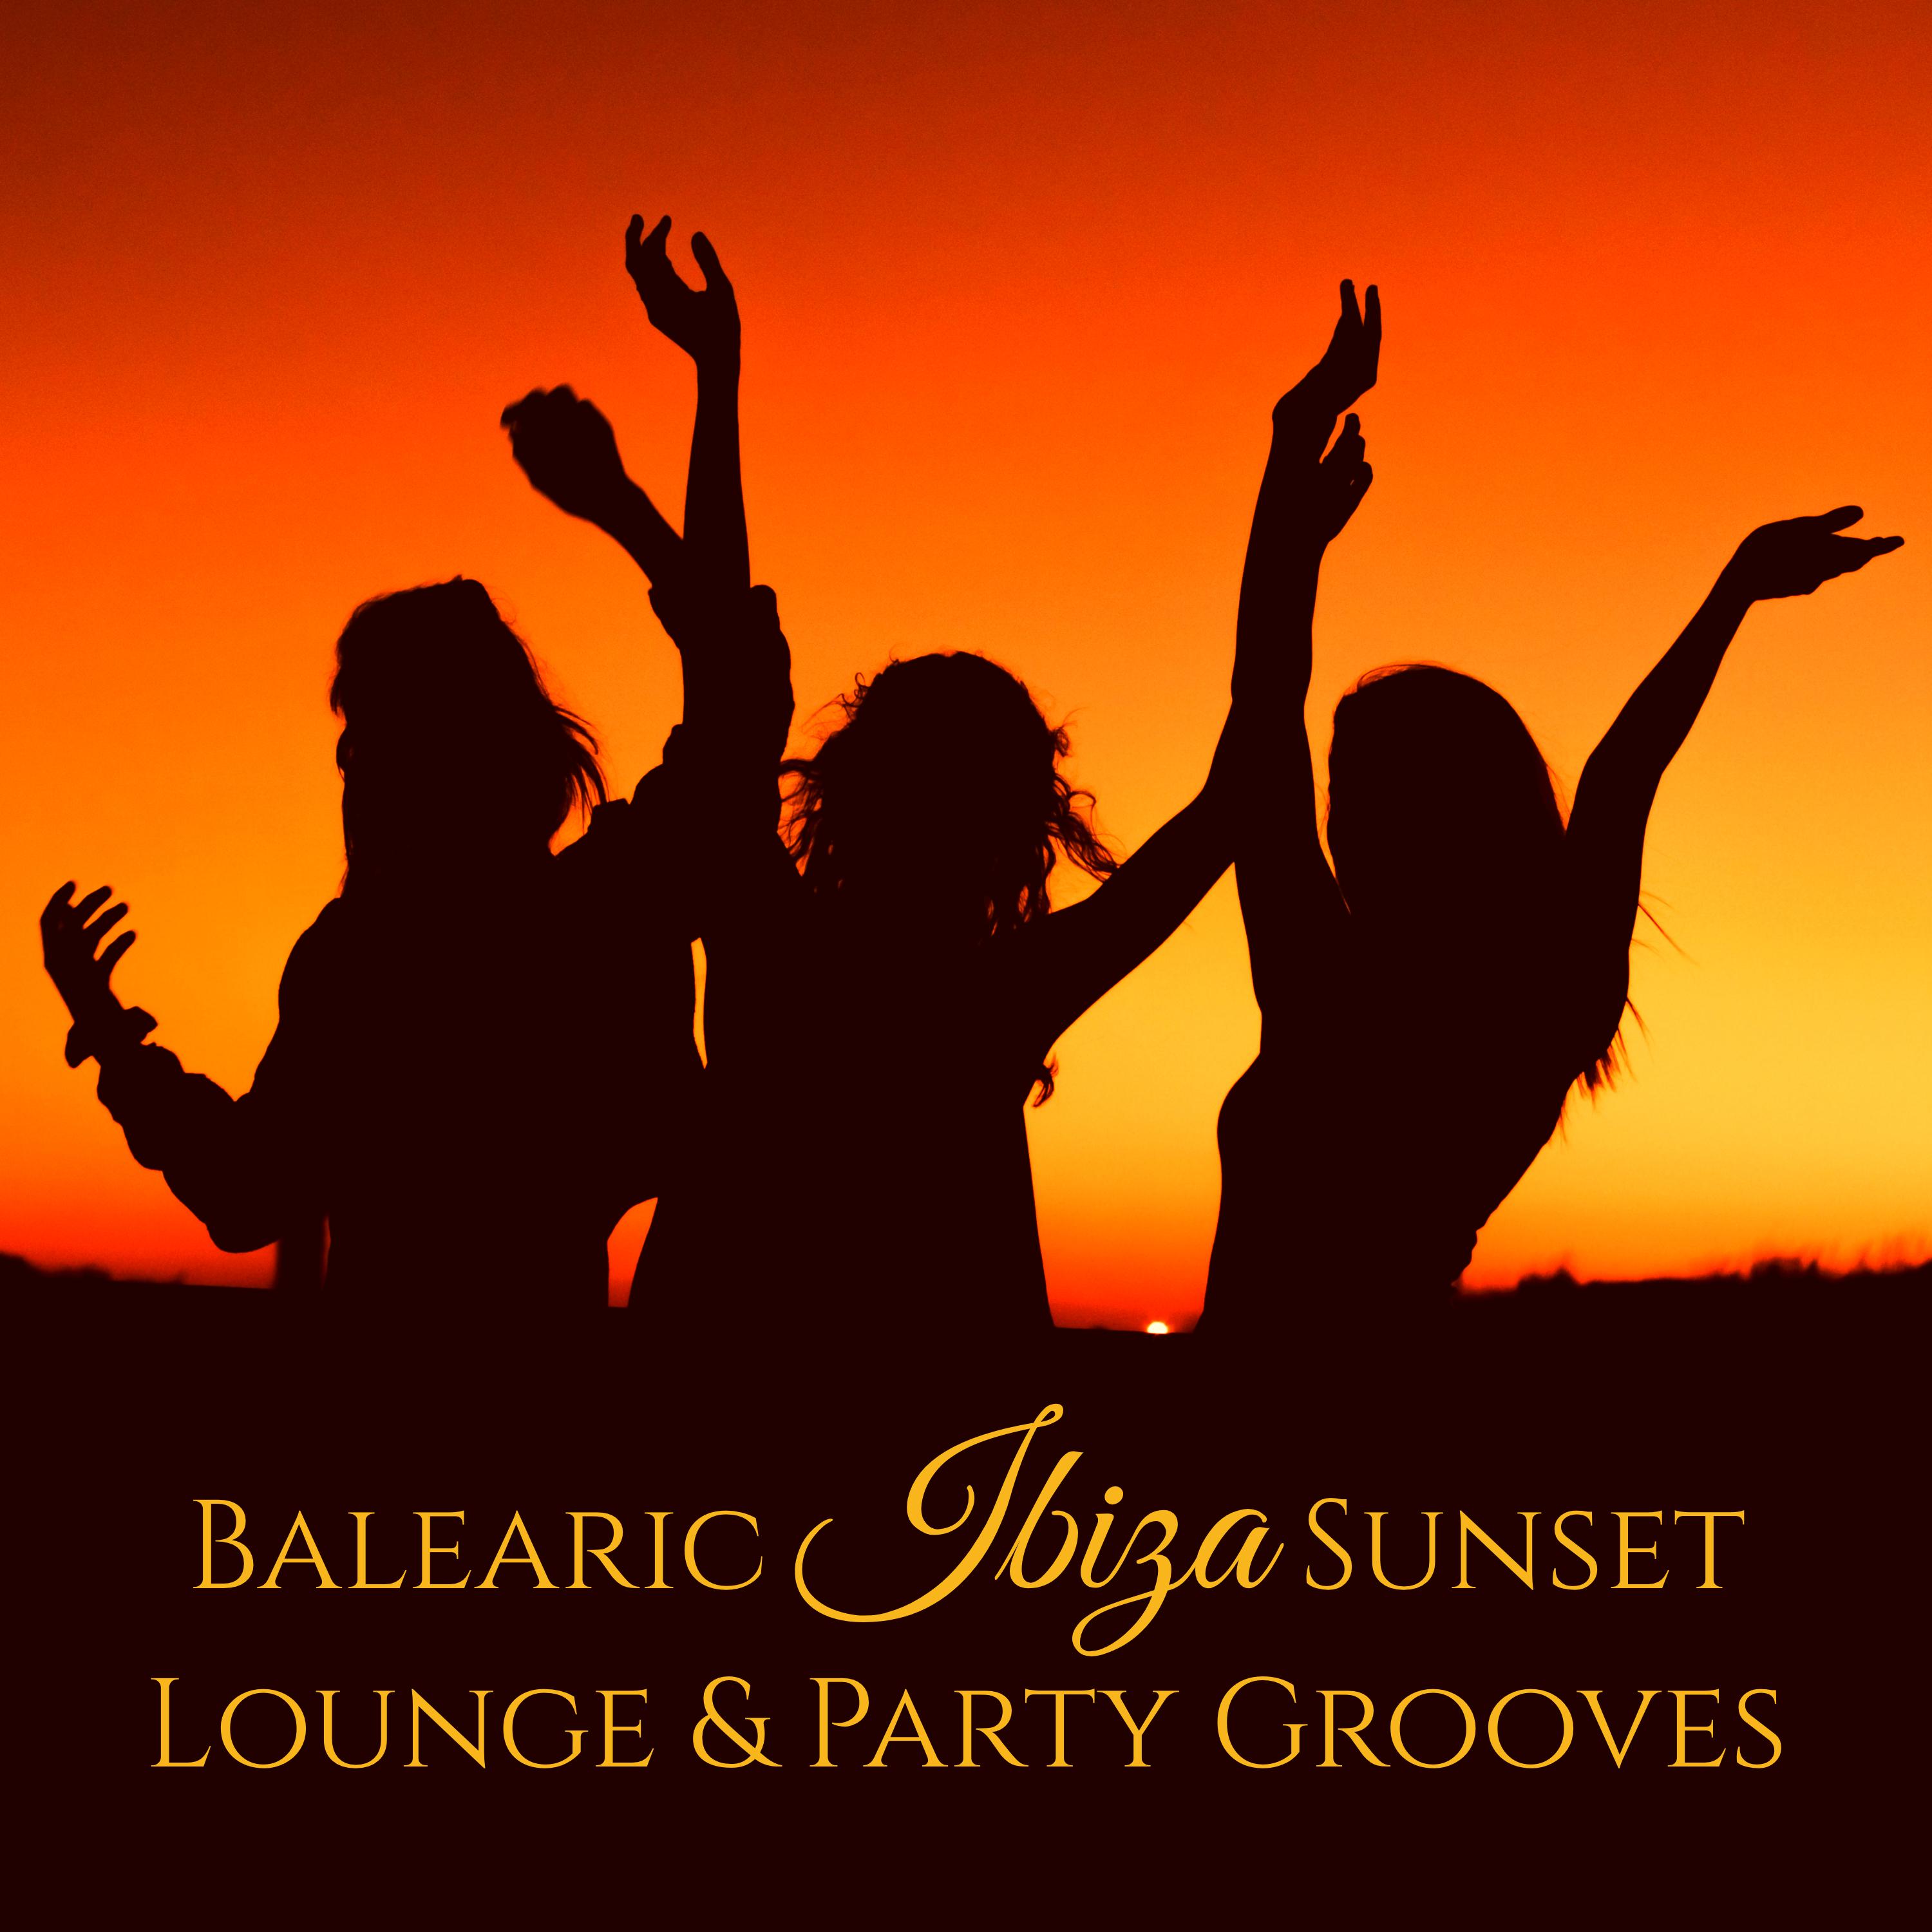 Balearic - Sunset Lounge & Party Grooves